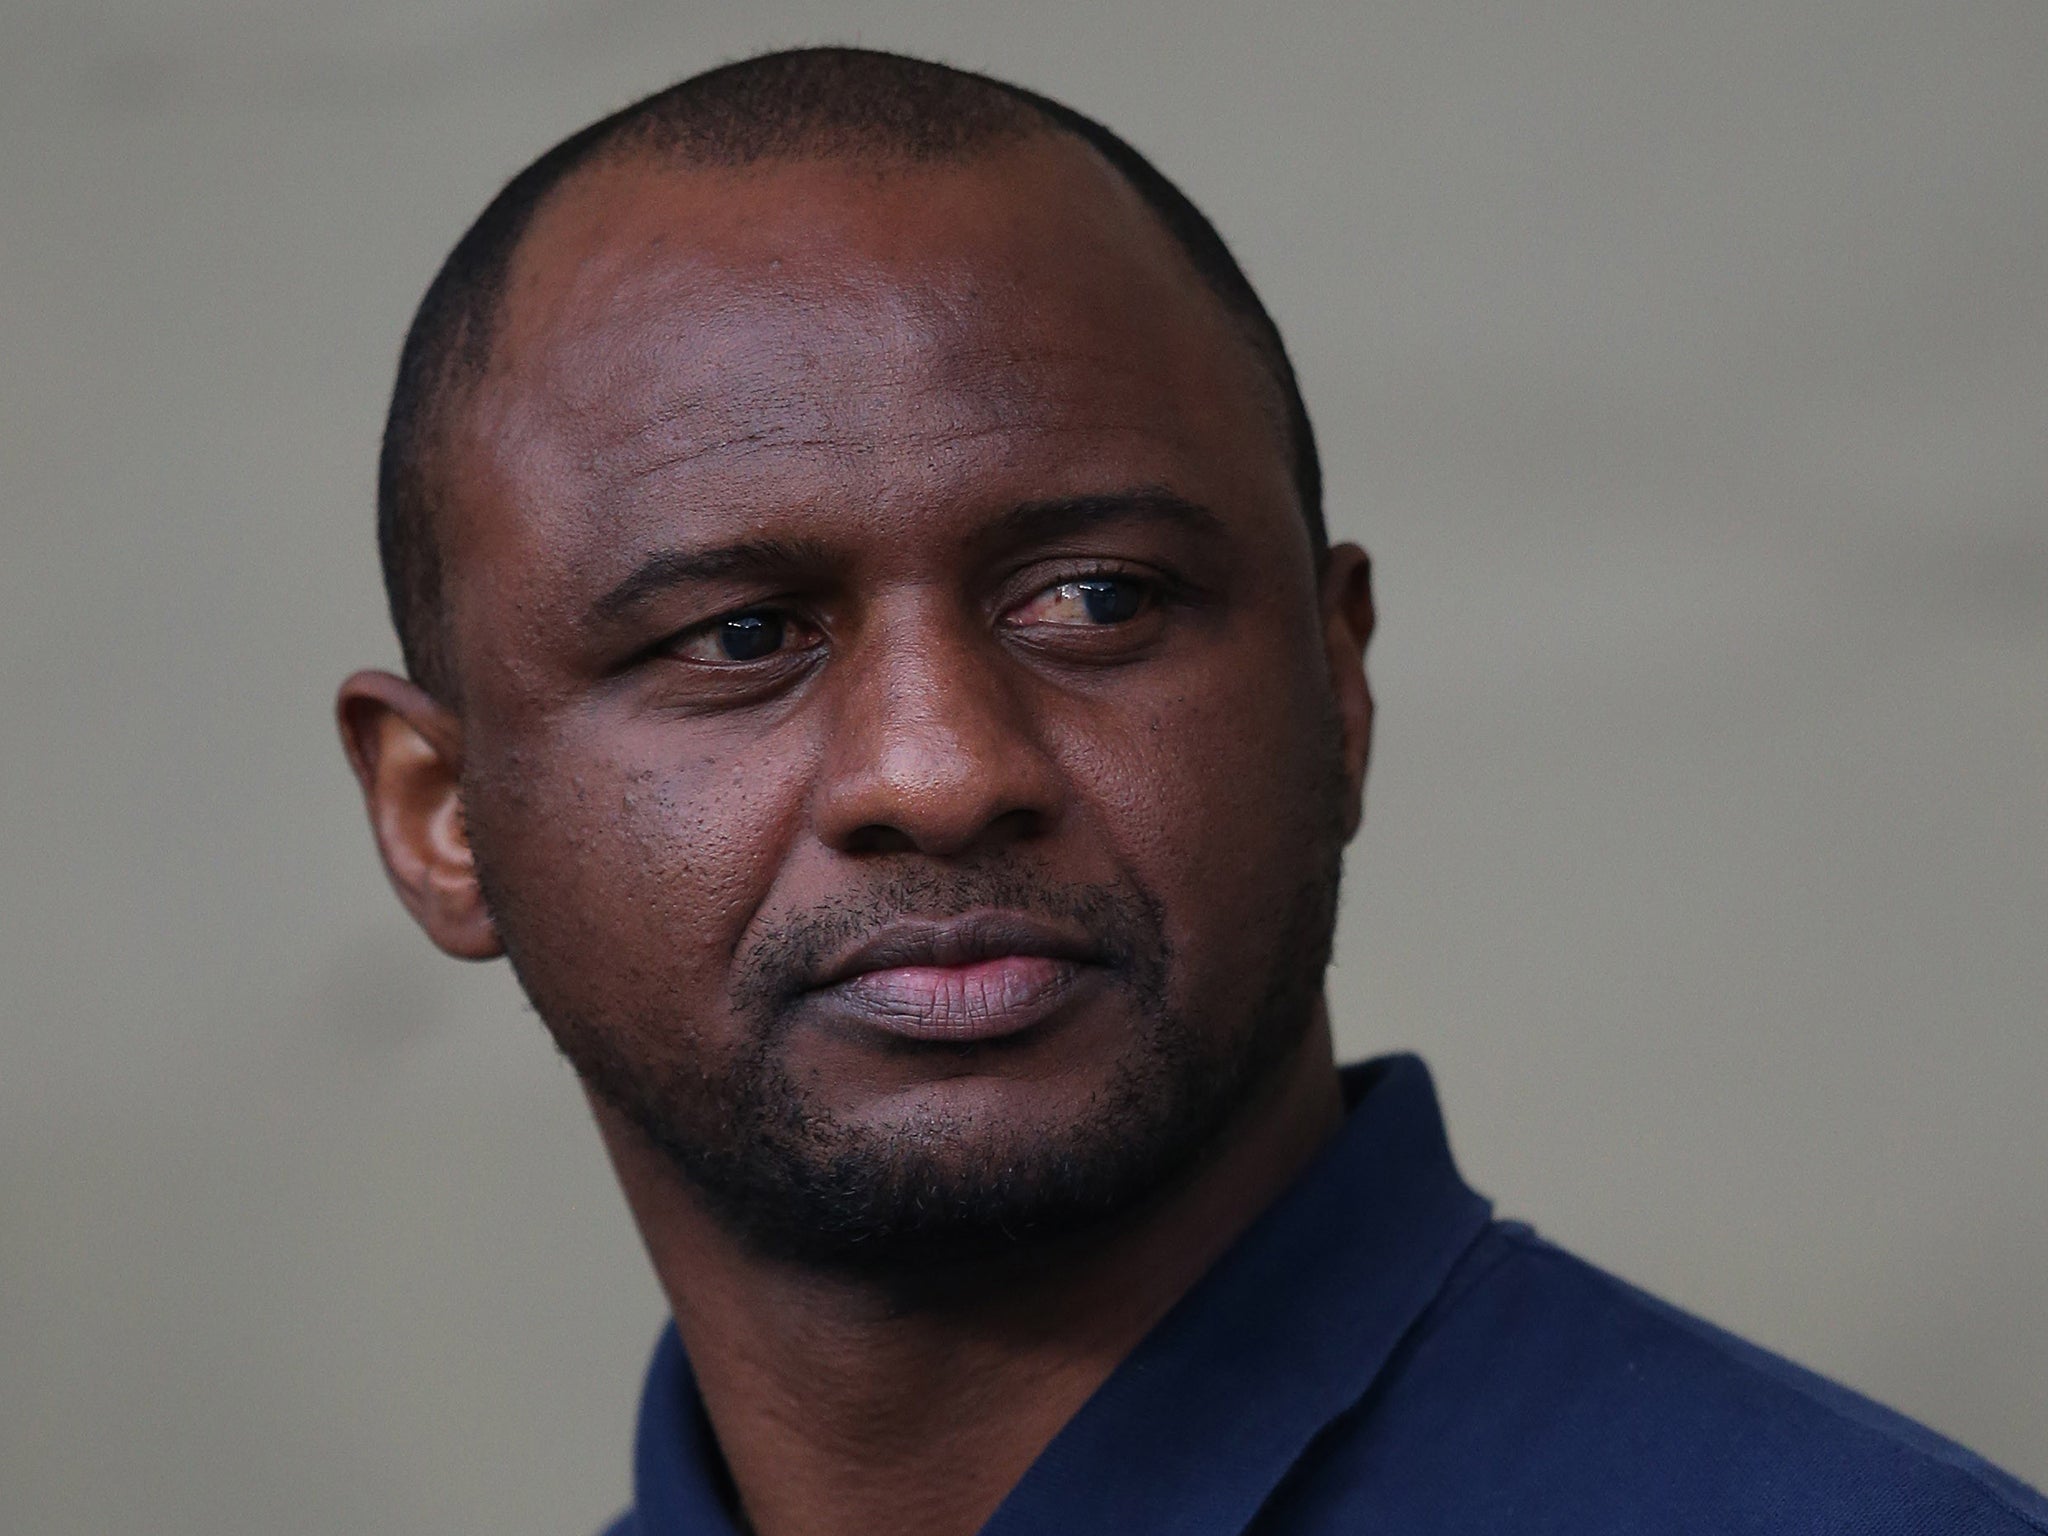 Patrick Vieira could be the next man to lead Arsenal